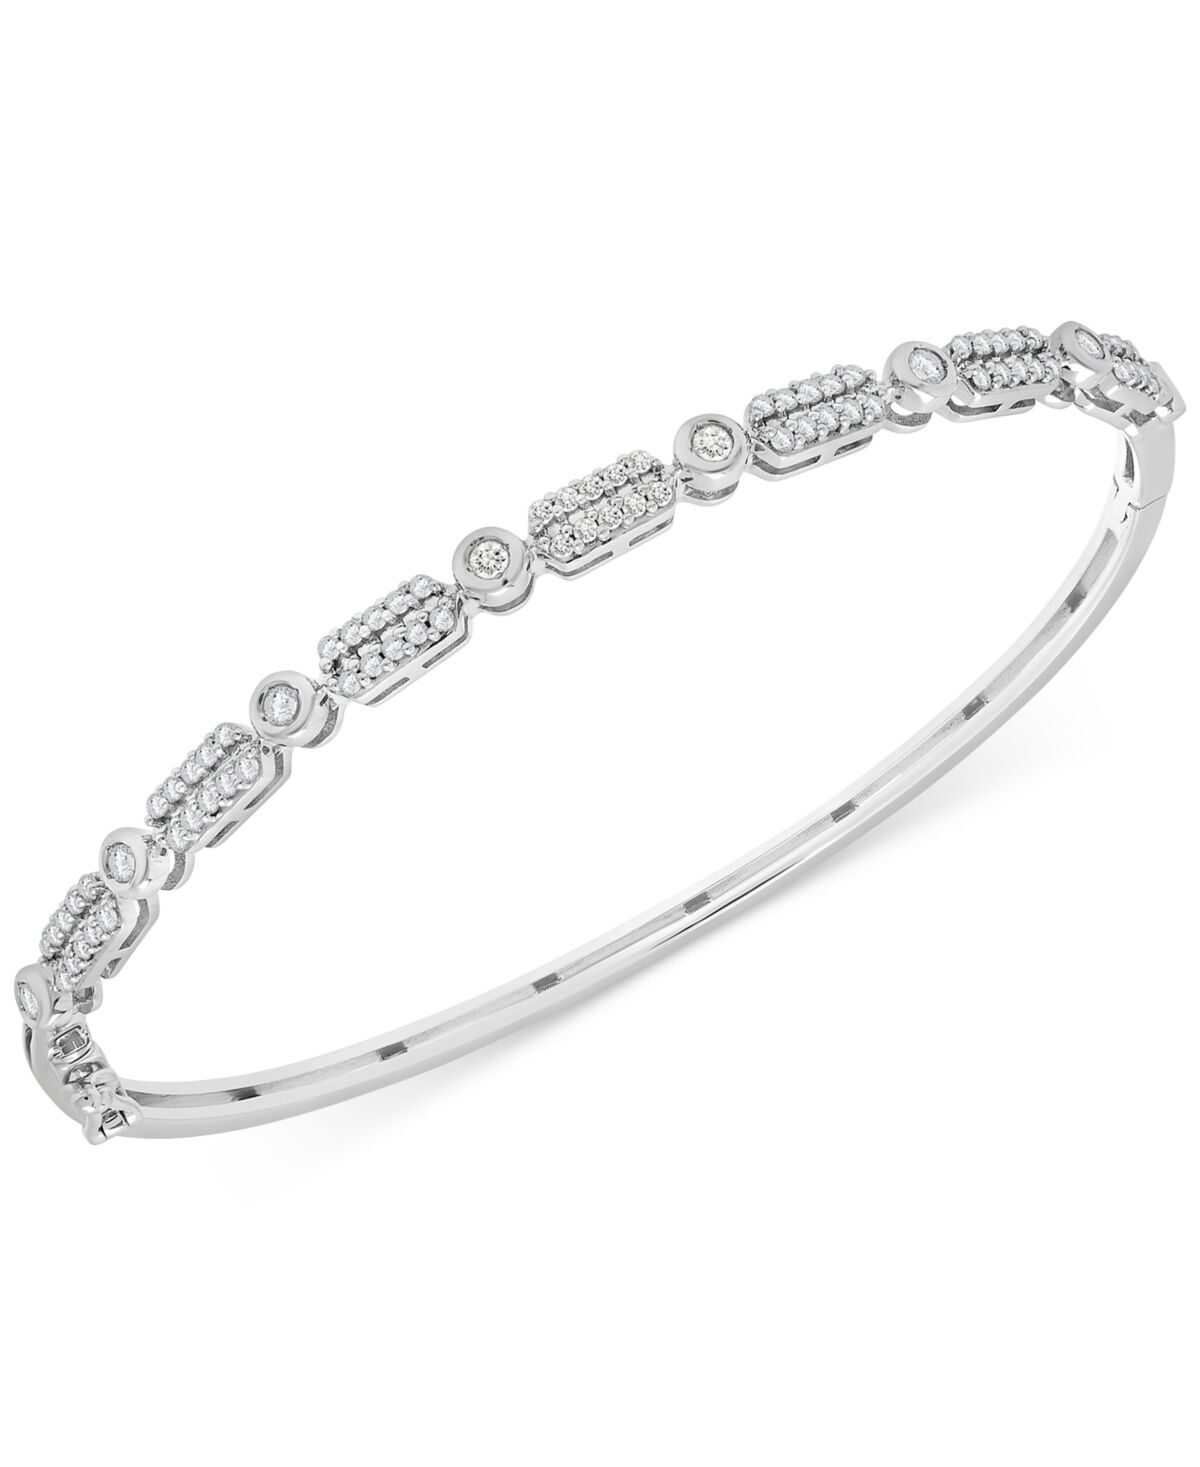 Wrapped Diamond Bangle Bracelet (1/2 ct. t.w.), in Sterling Silver, 14k Gold-Plated Sterling Silver or 14k Rose Gold-Plated Sterling Silver, Created f